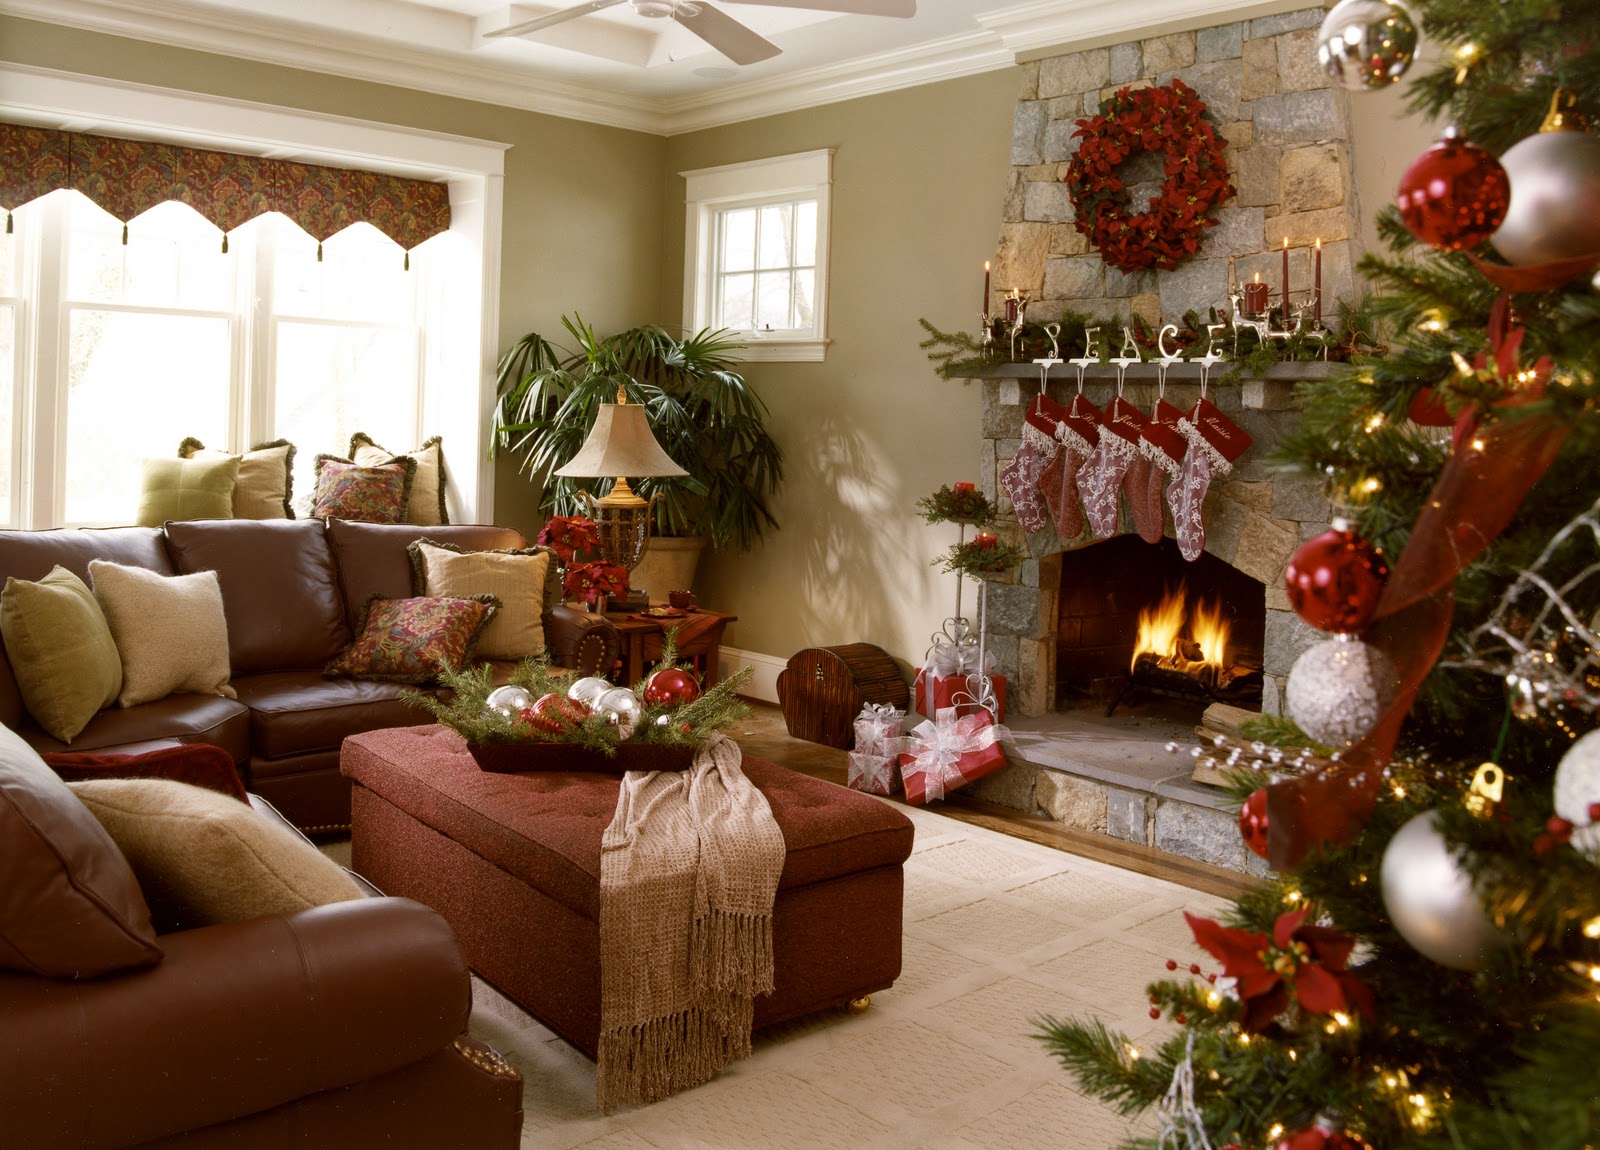 How To Decorate Your Ceiling For Christmas